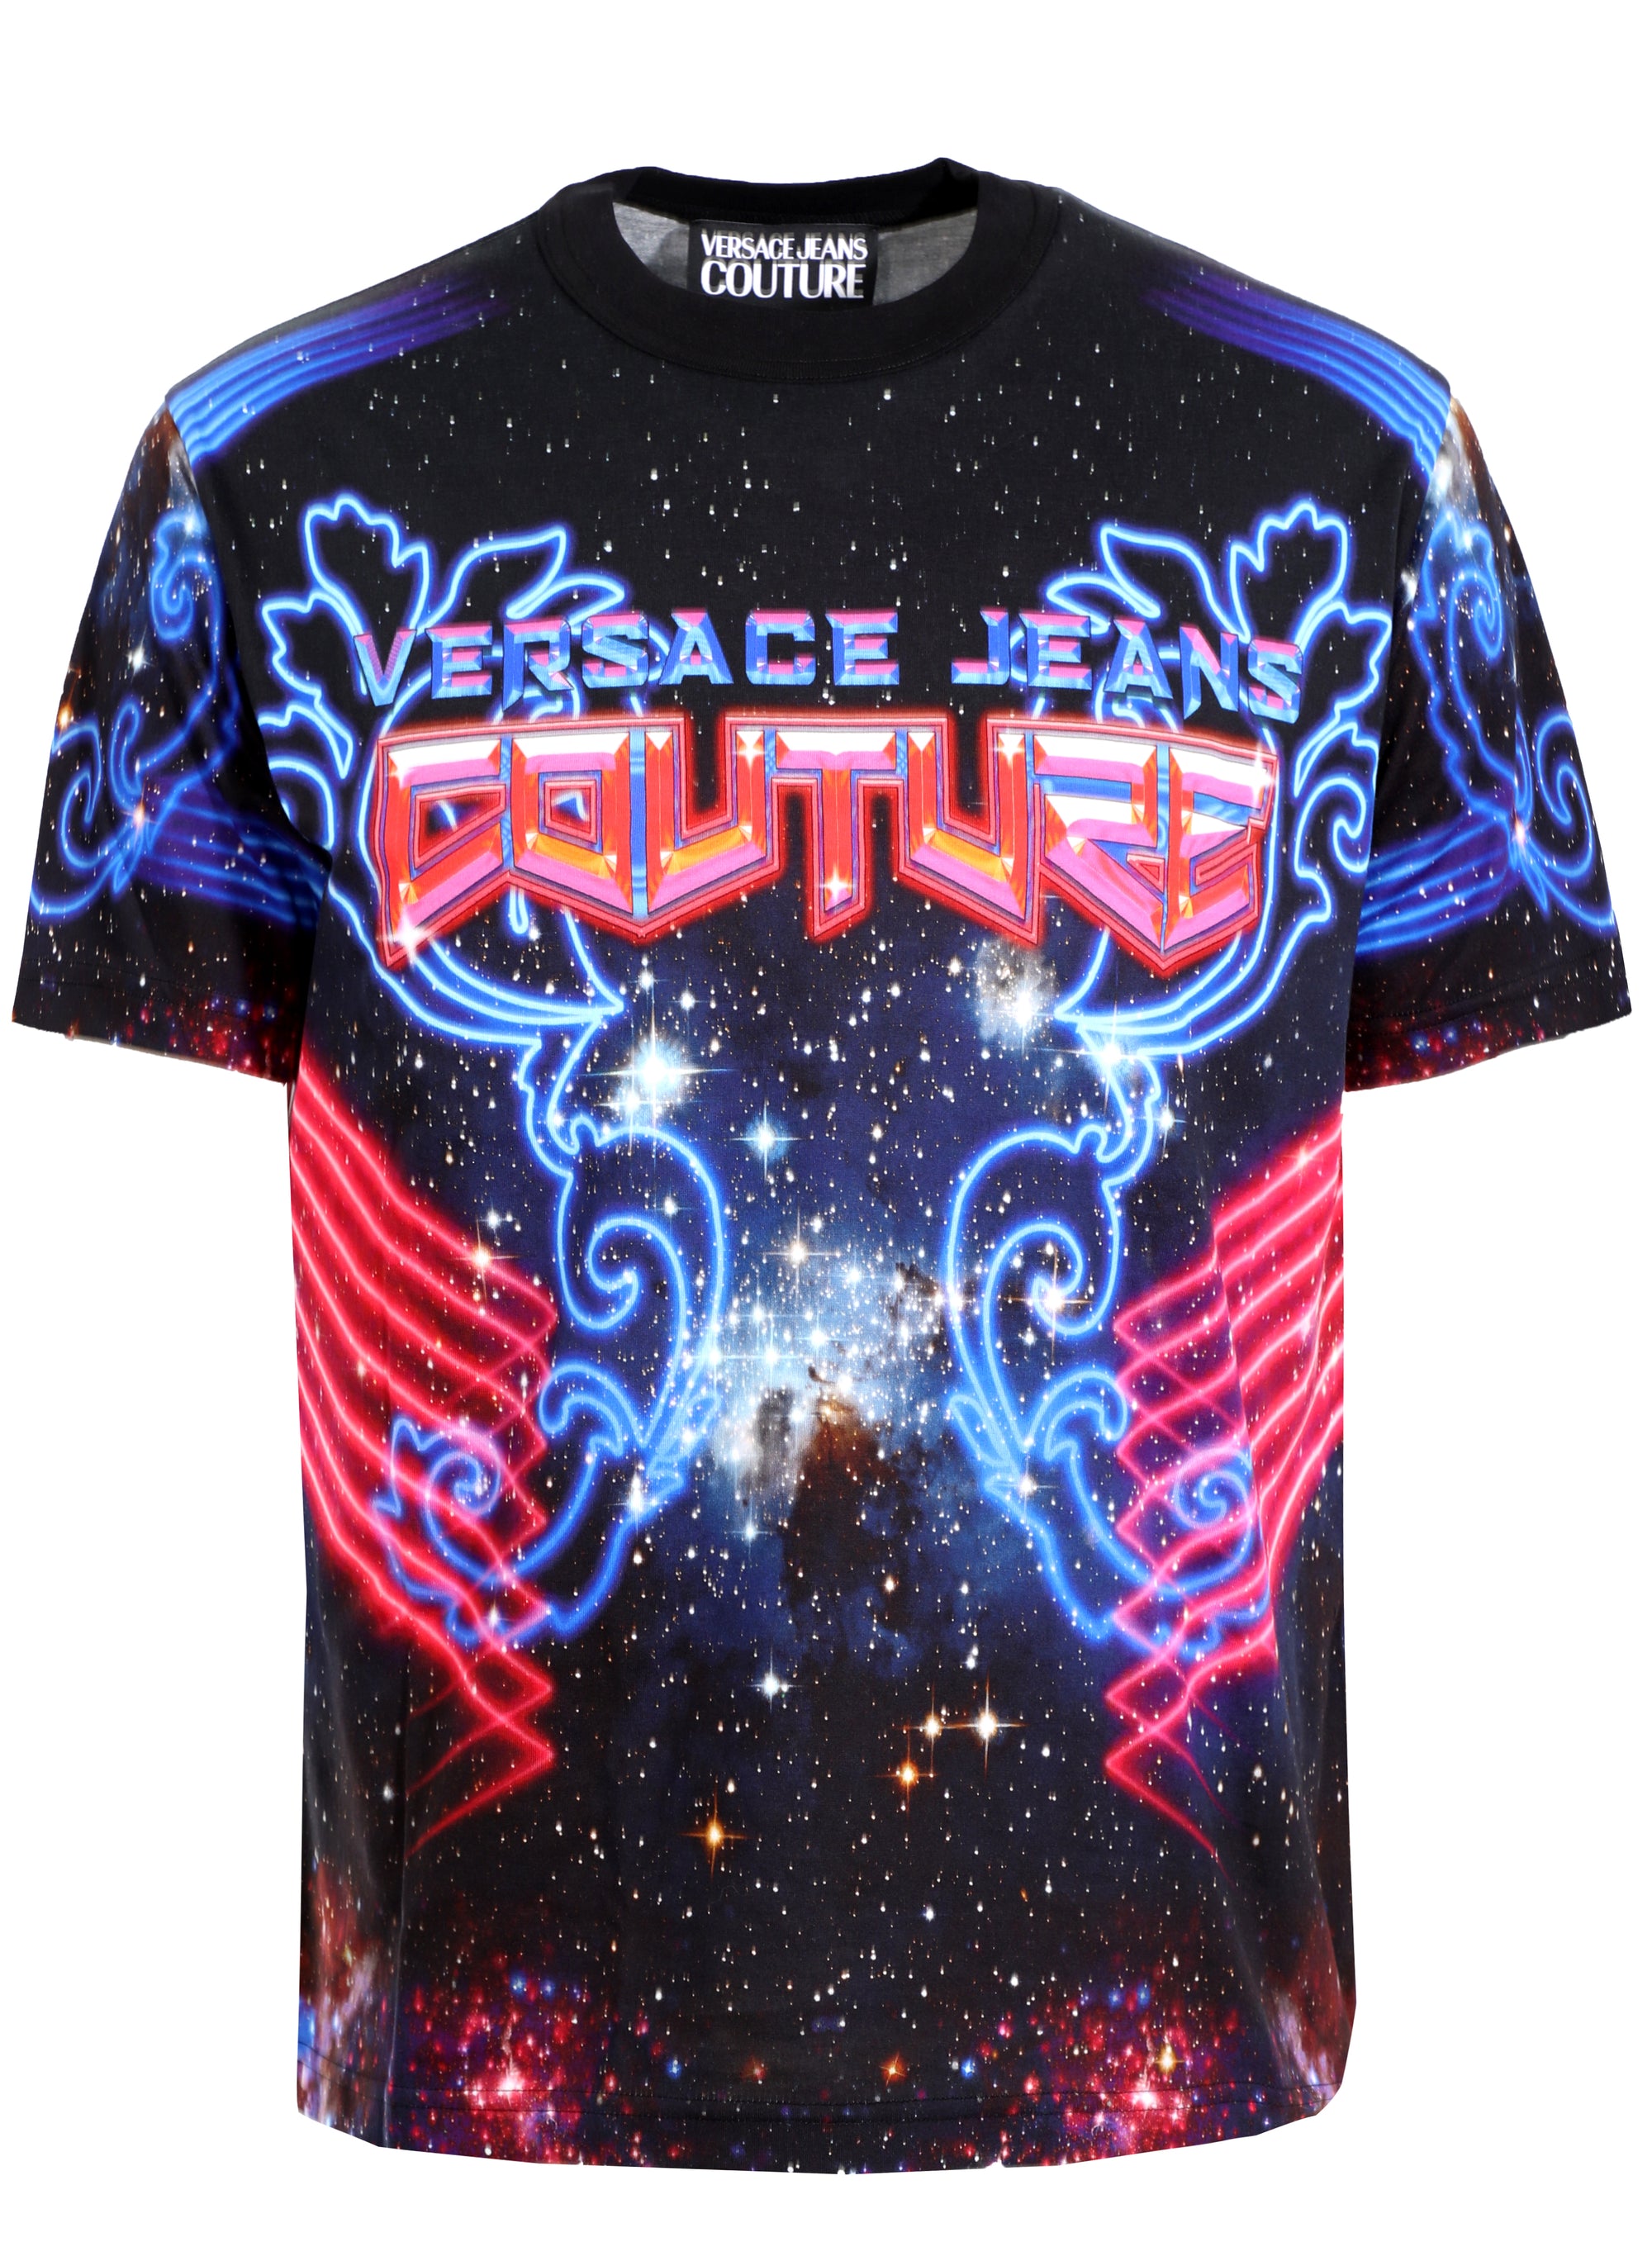 GALAXY COUTURE JERSEY TSHIRT - BLACK